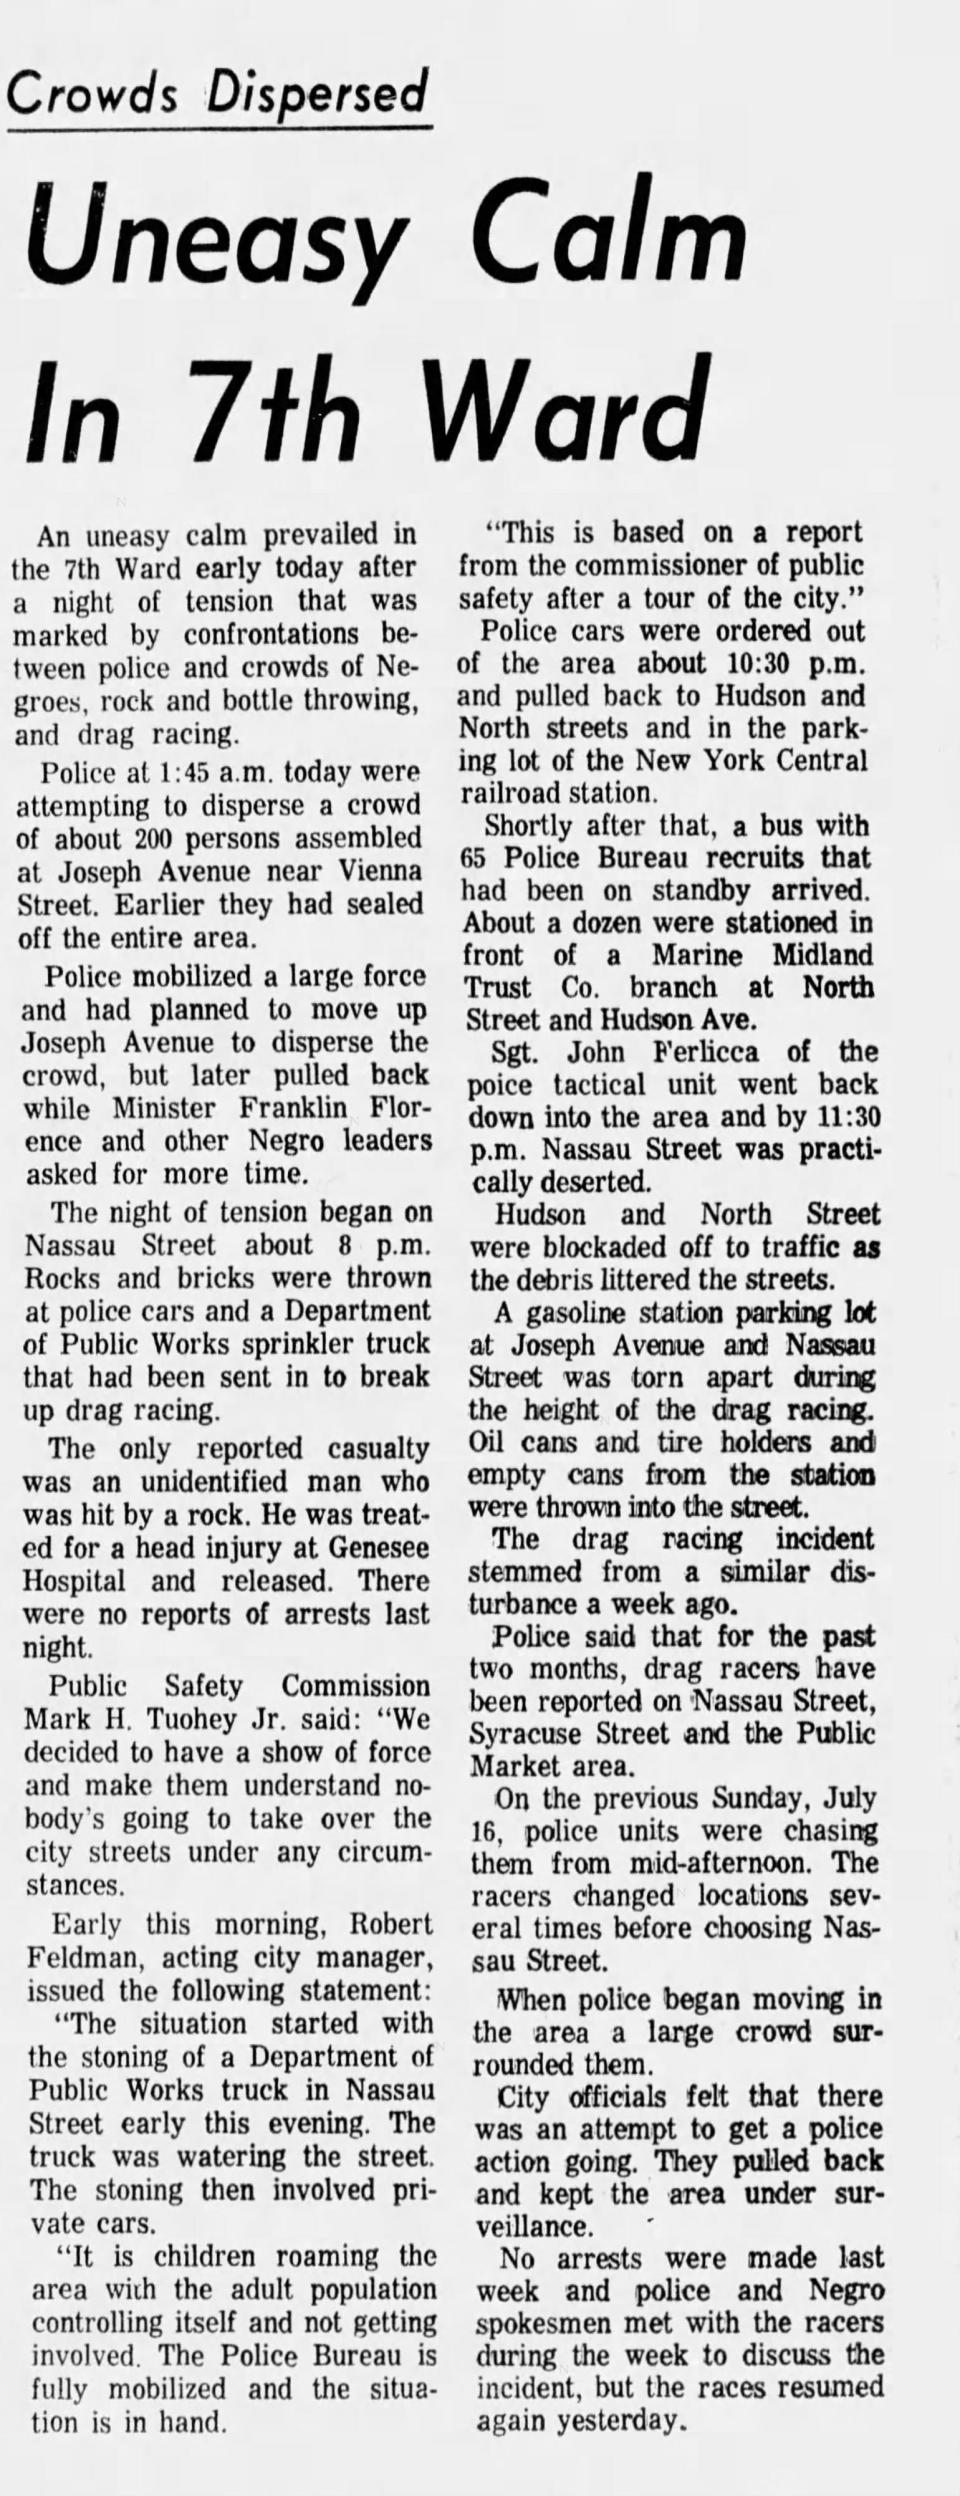 A Democrat and Chronicle story from July 24, 1967, after racial violence was mostly averted.